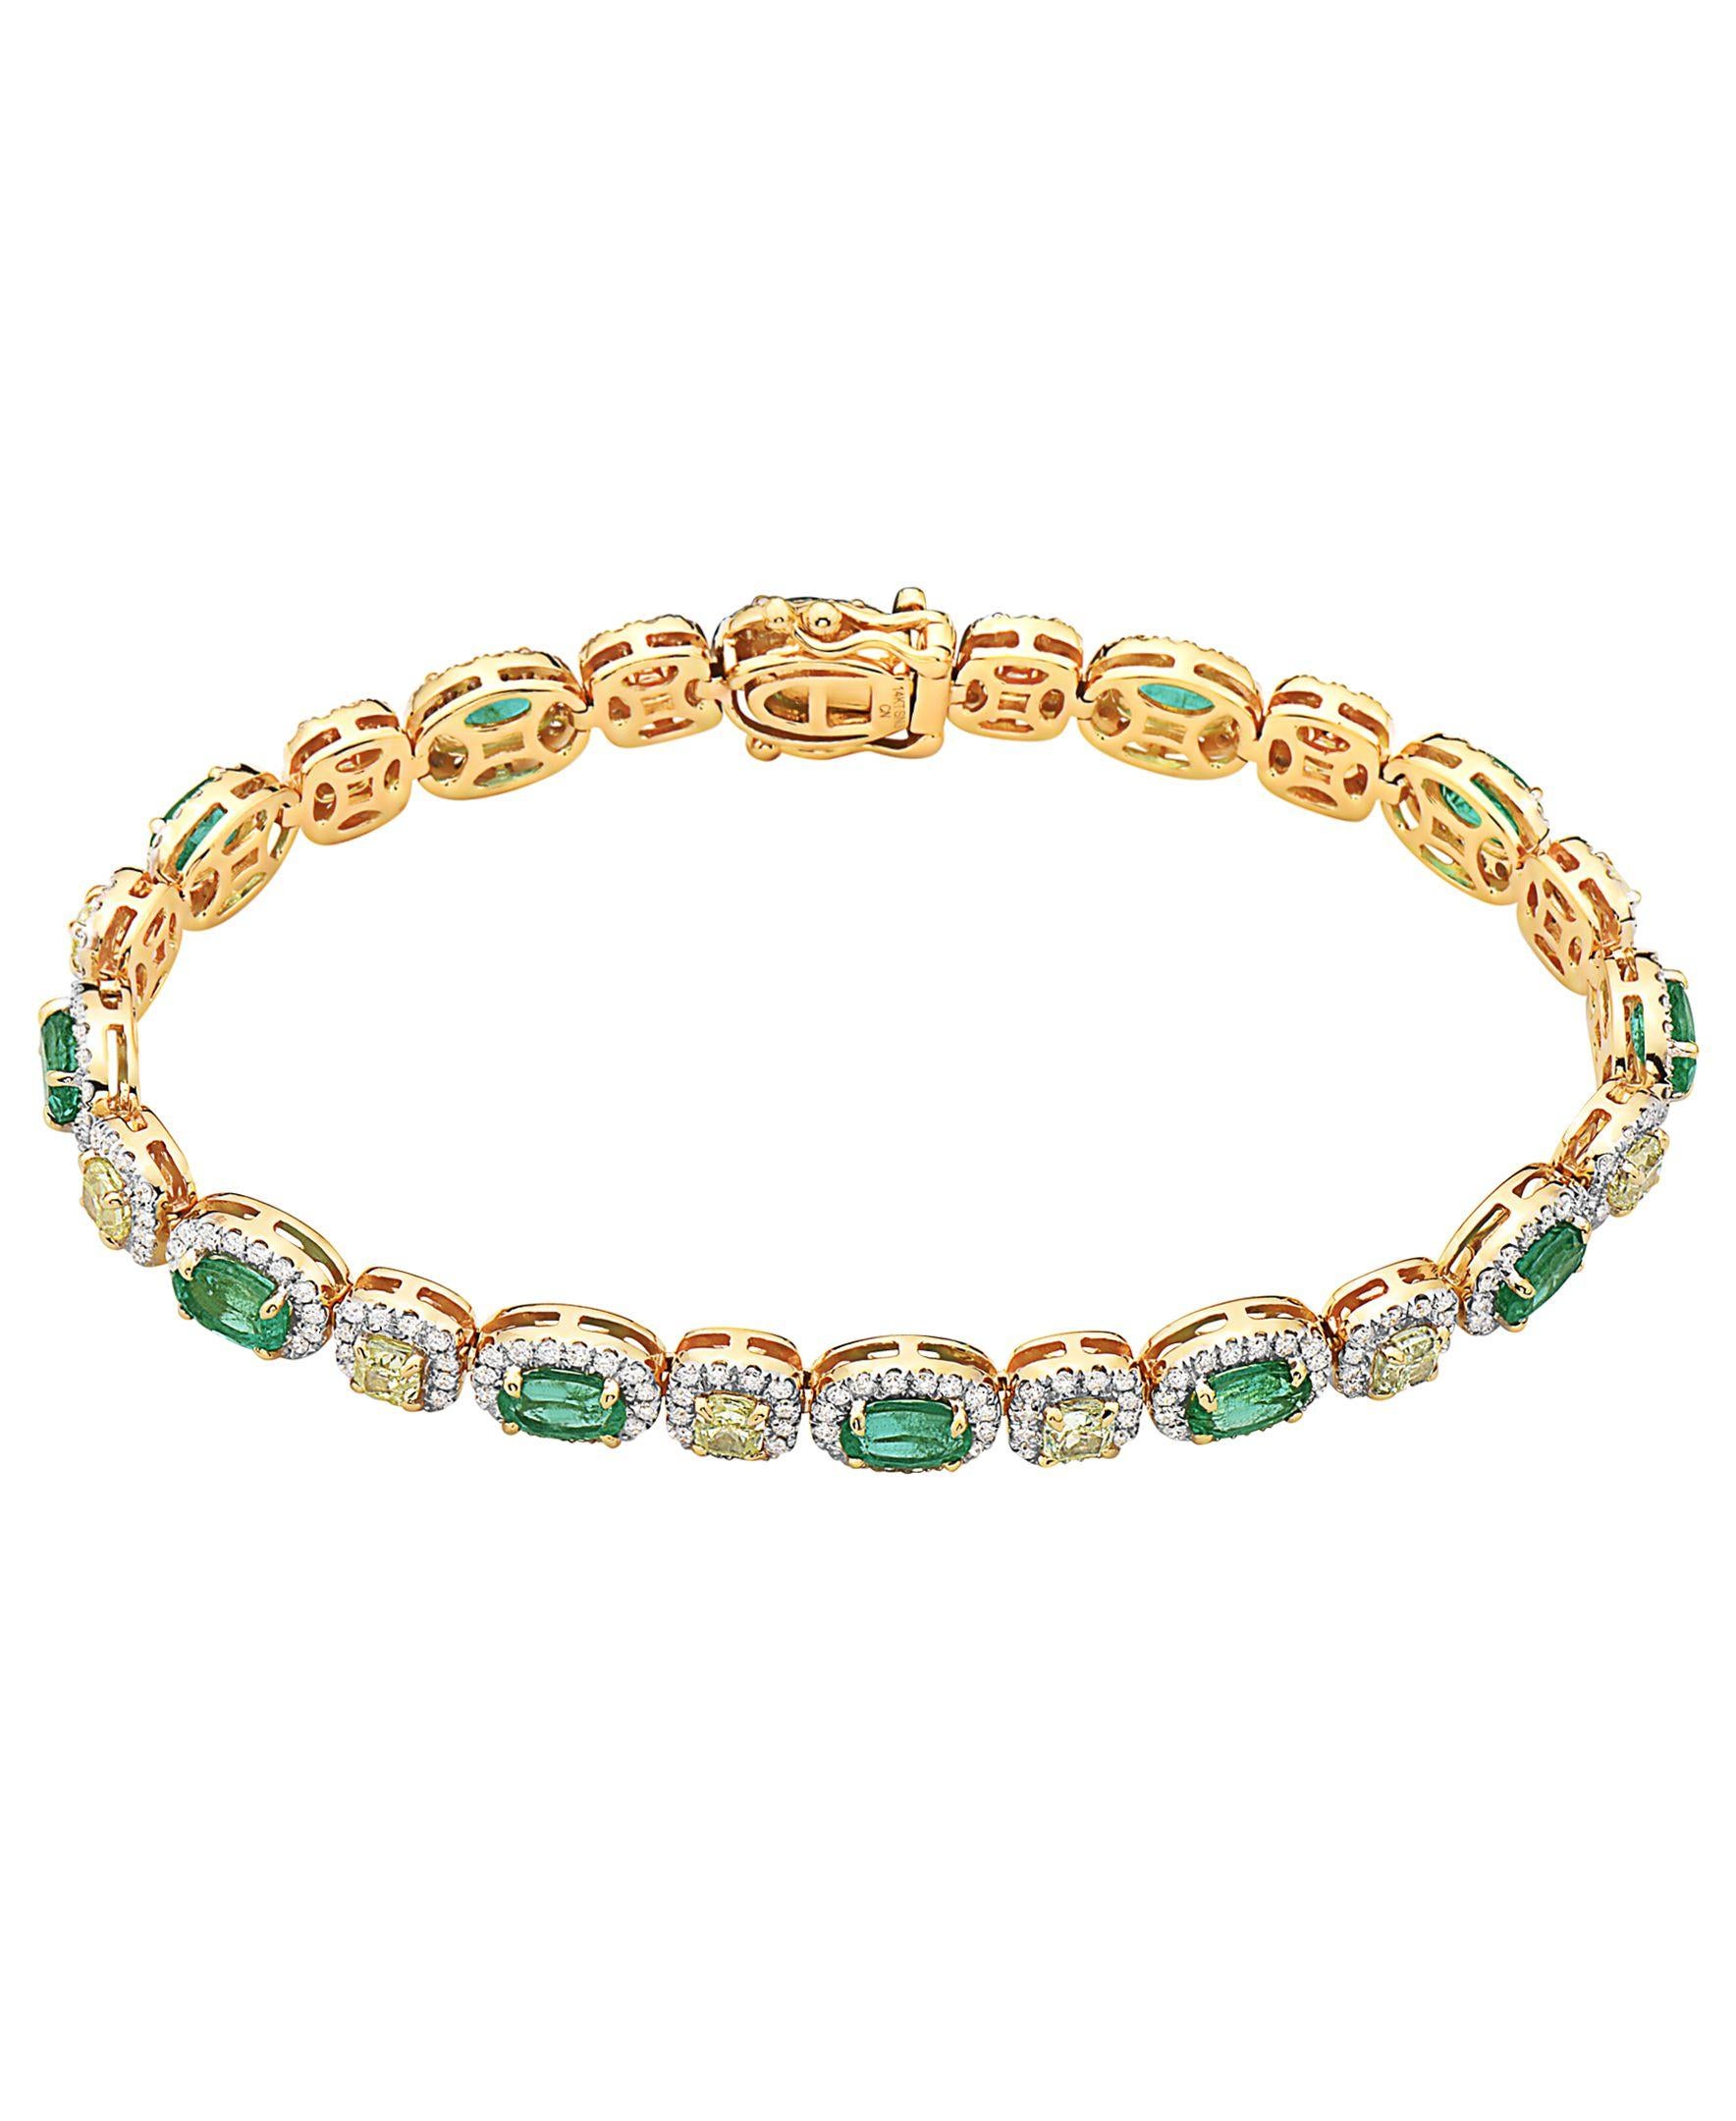 IGI Certified 4.50 Carat Emerald Bracelet with Yellow & White Diamonds in 14K In New Condition For Sale In New York, NY